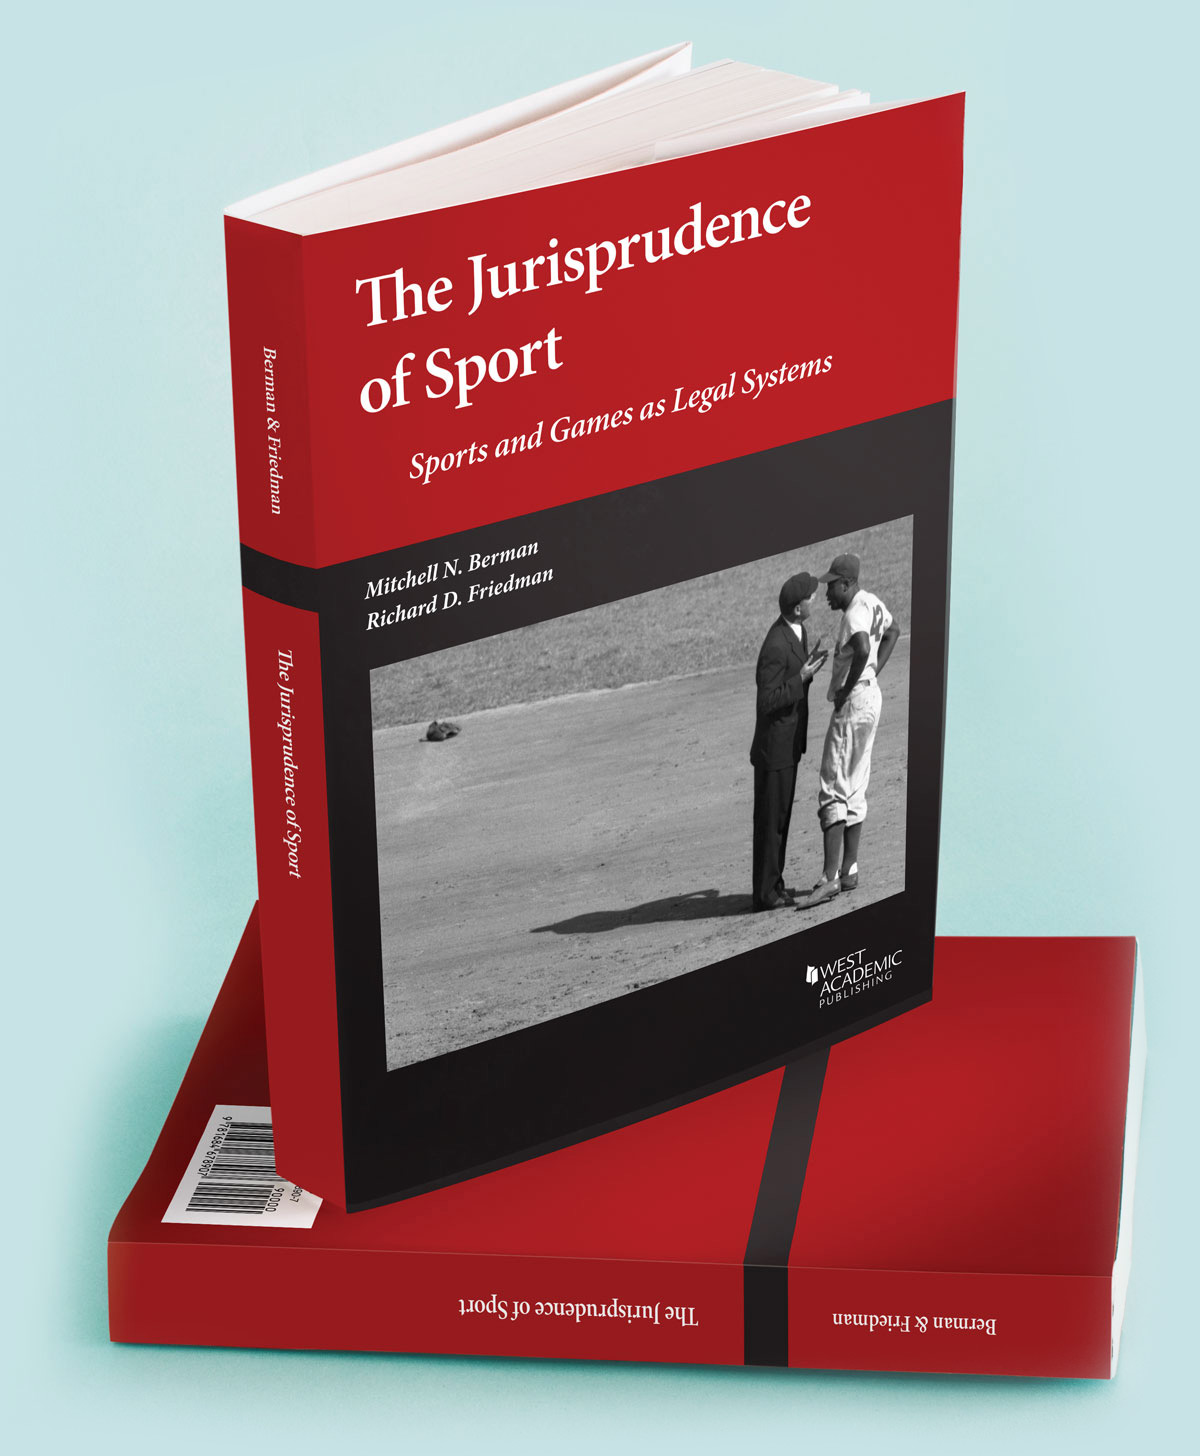 The Jurisprudence of Sport: Sports and Games as Legal Systems book cover